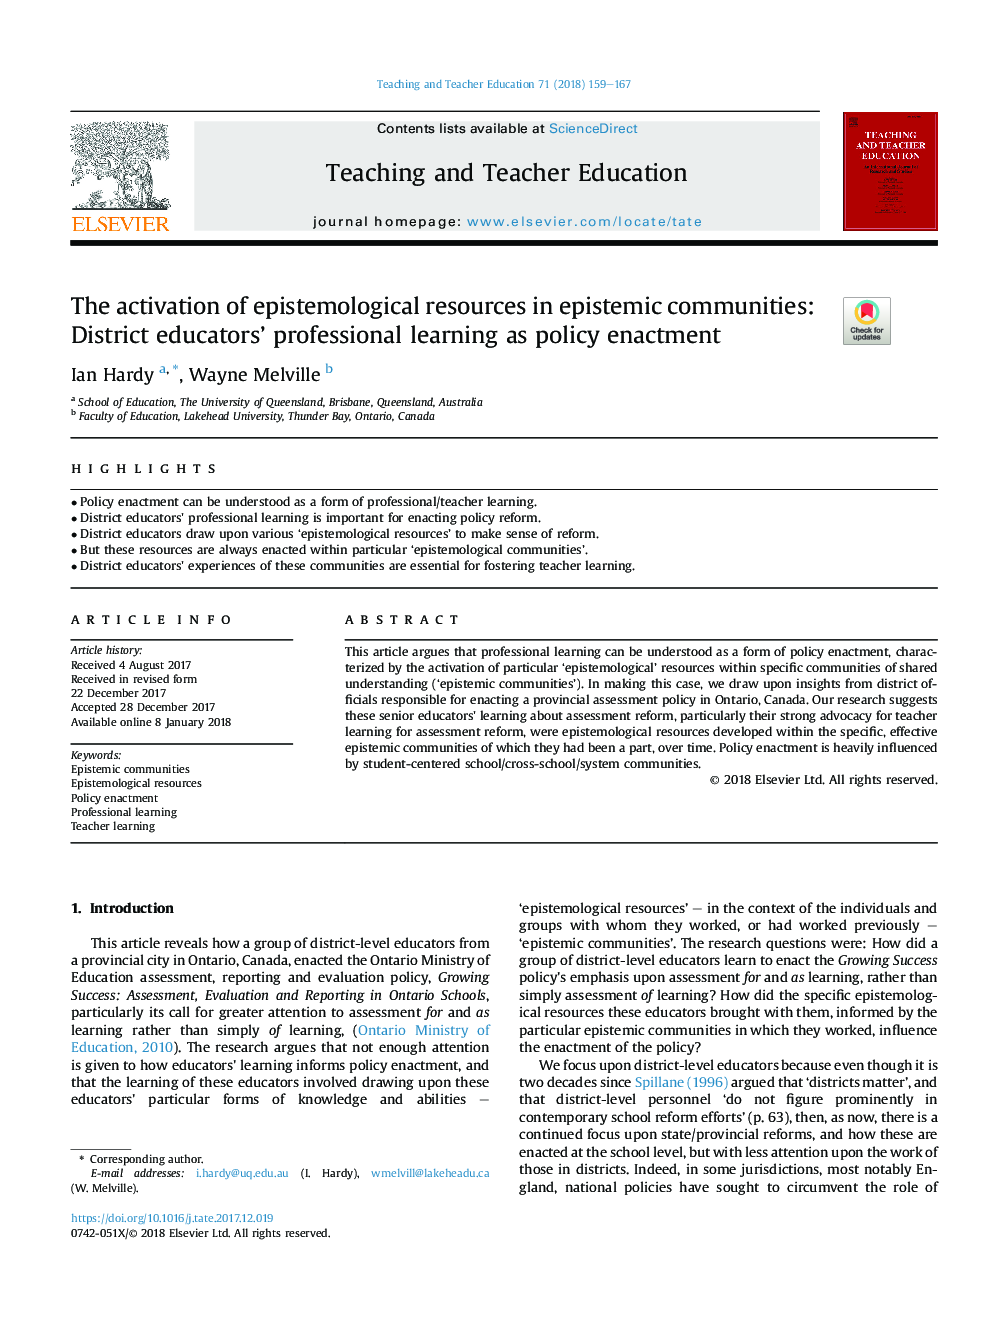 The activation of epistemological resources in epistemic communities: District educators' professional learning as policy enactment